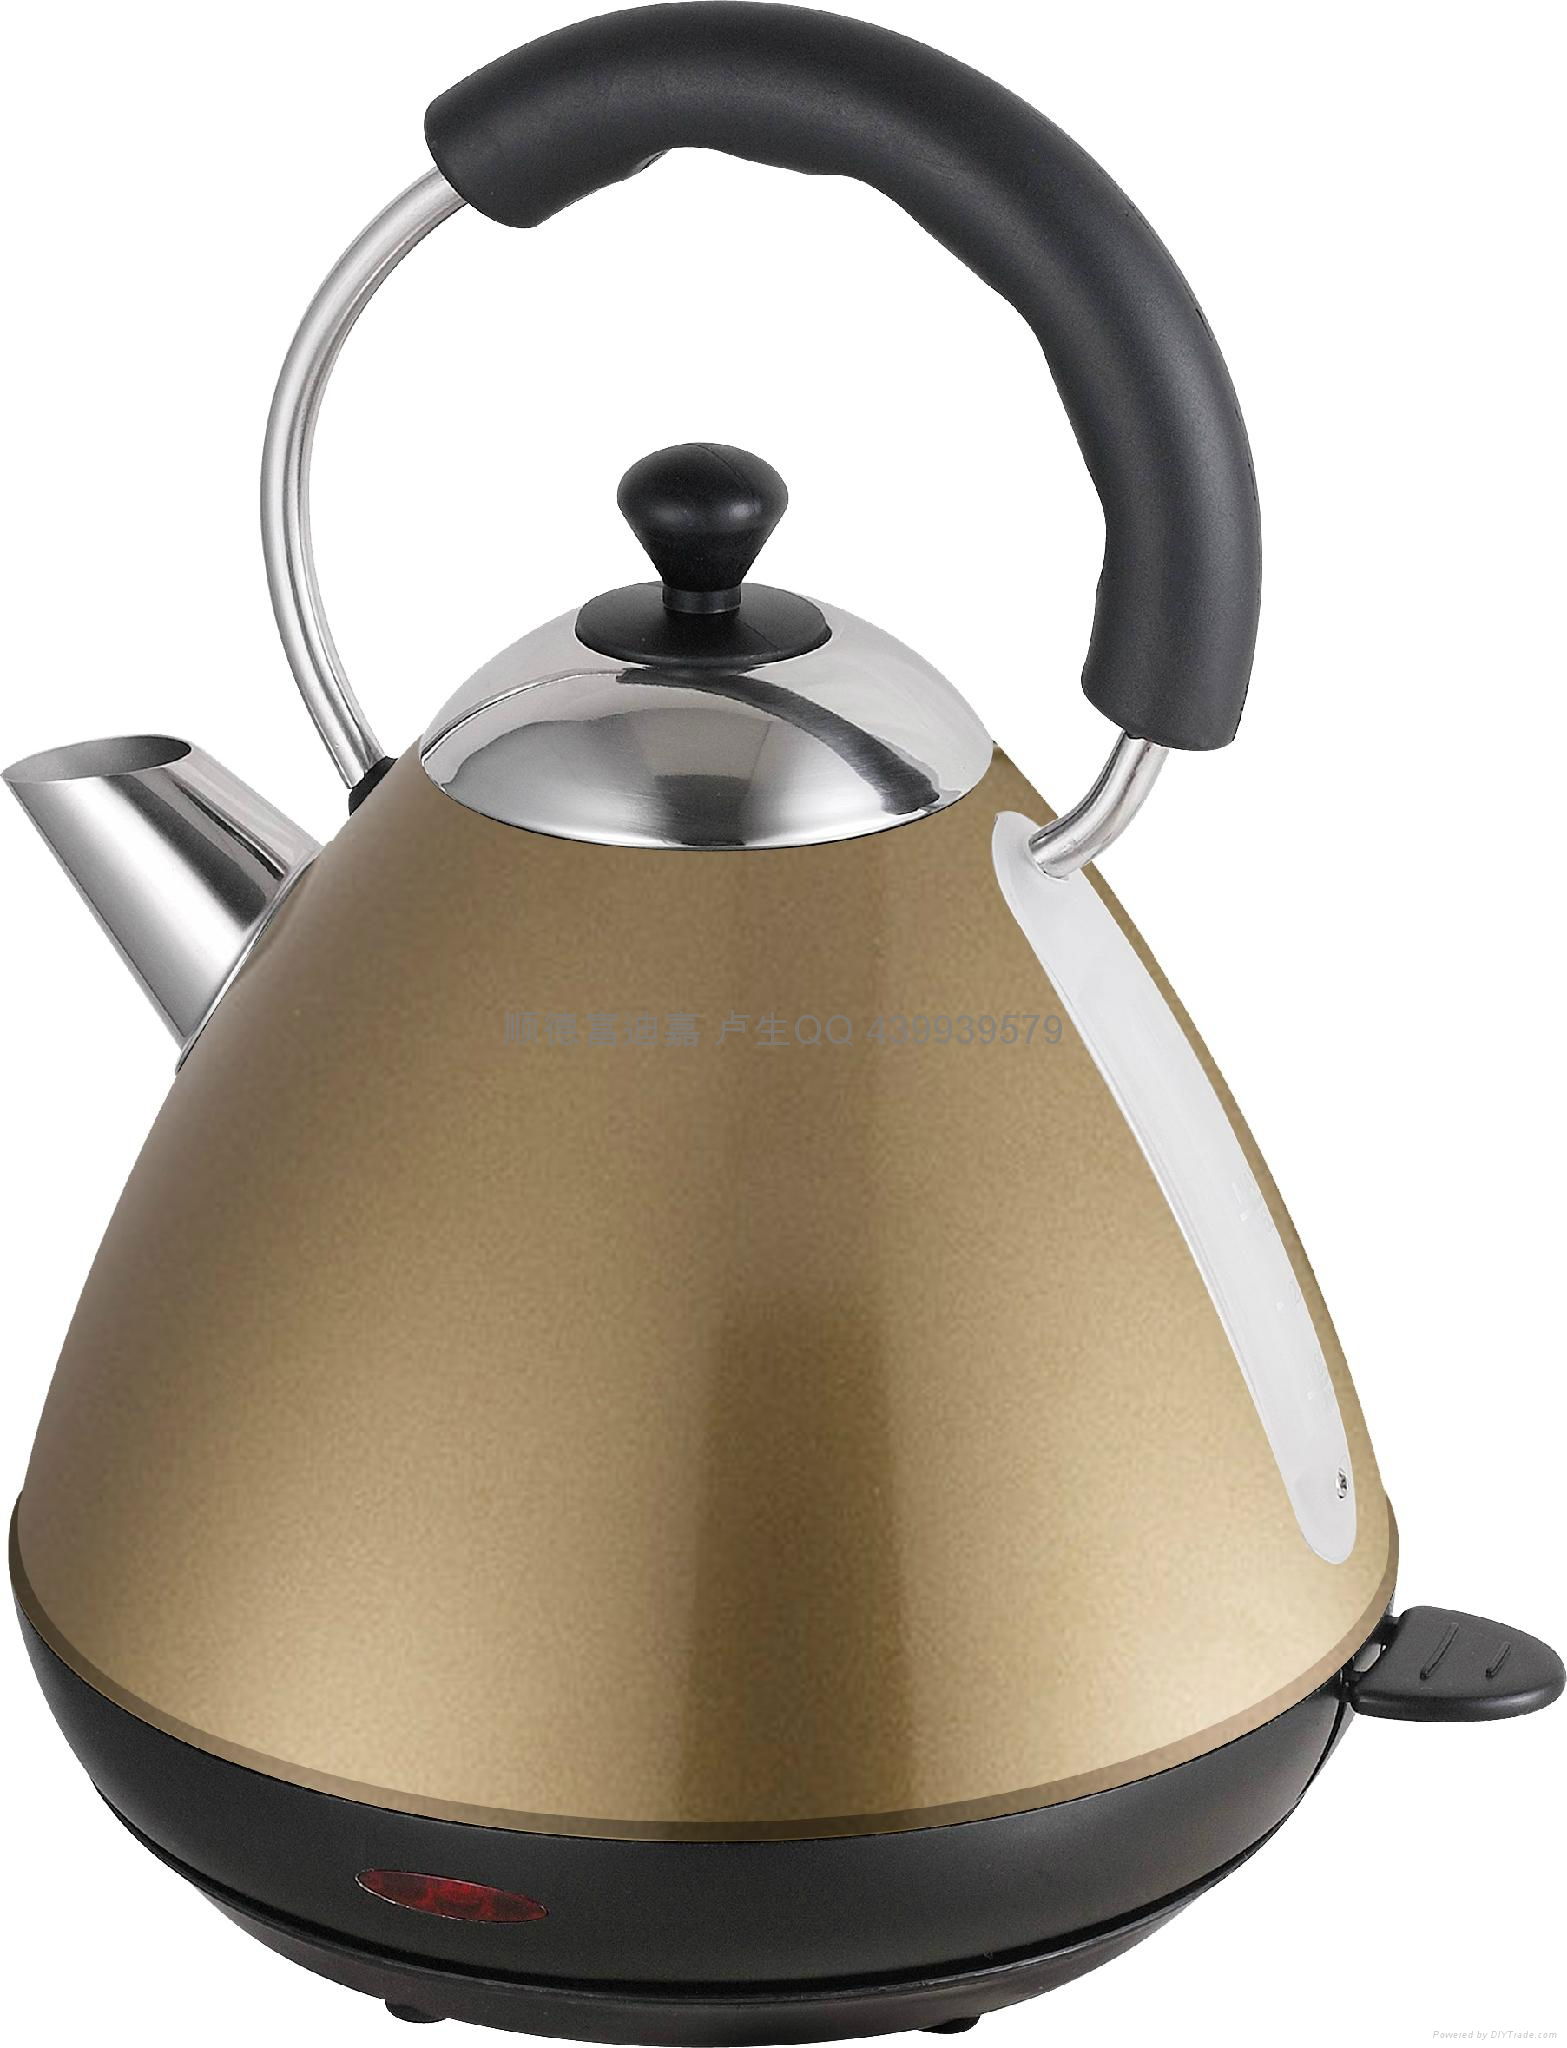 Stainless  electric kettle   /Colour Coating kettle/   4